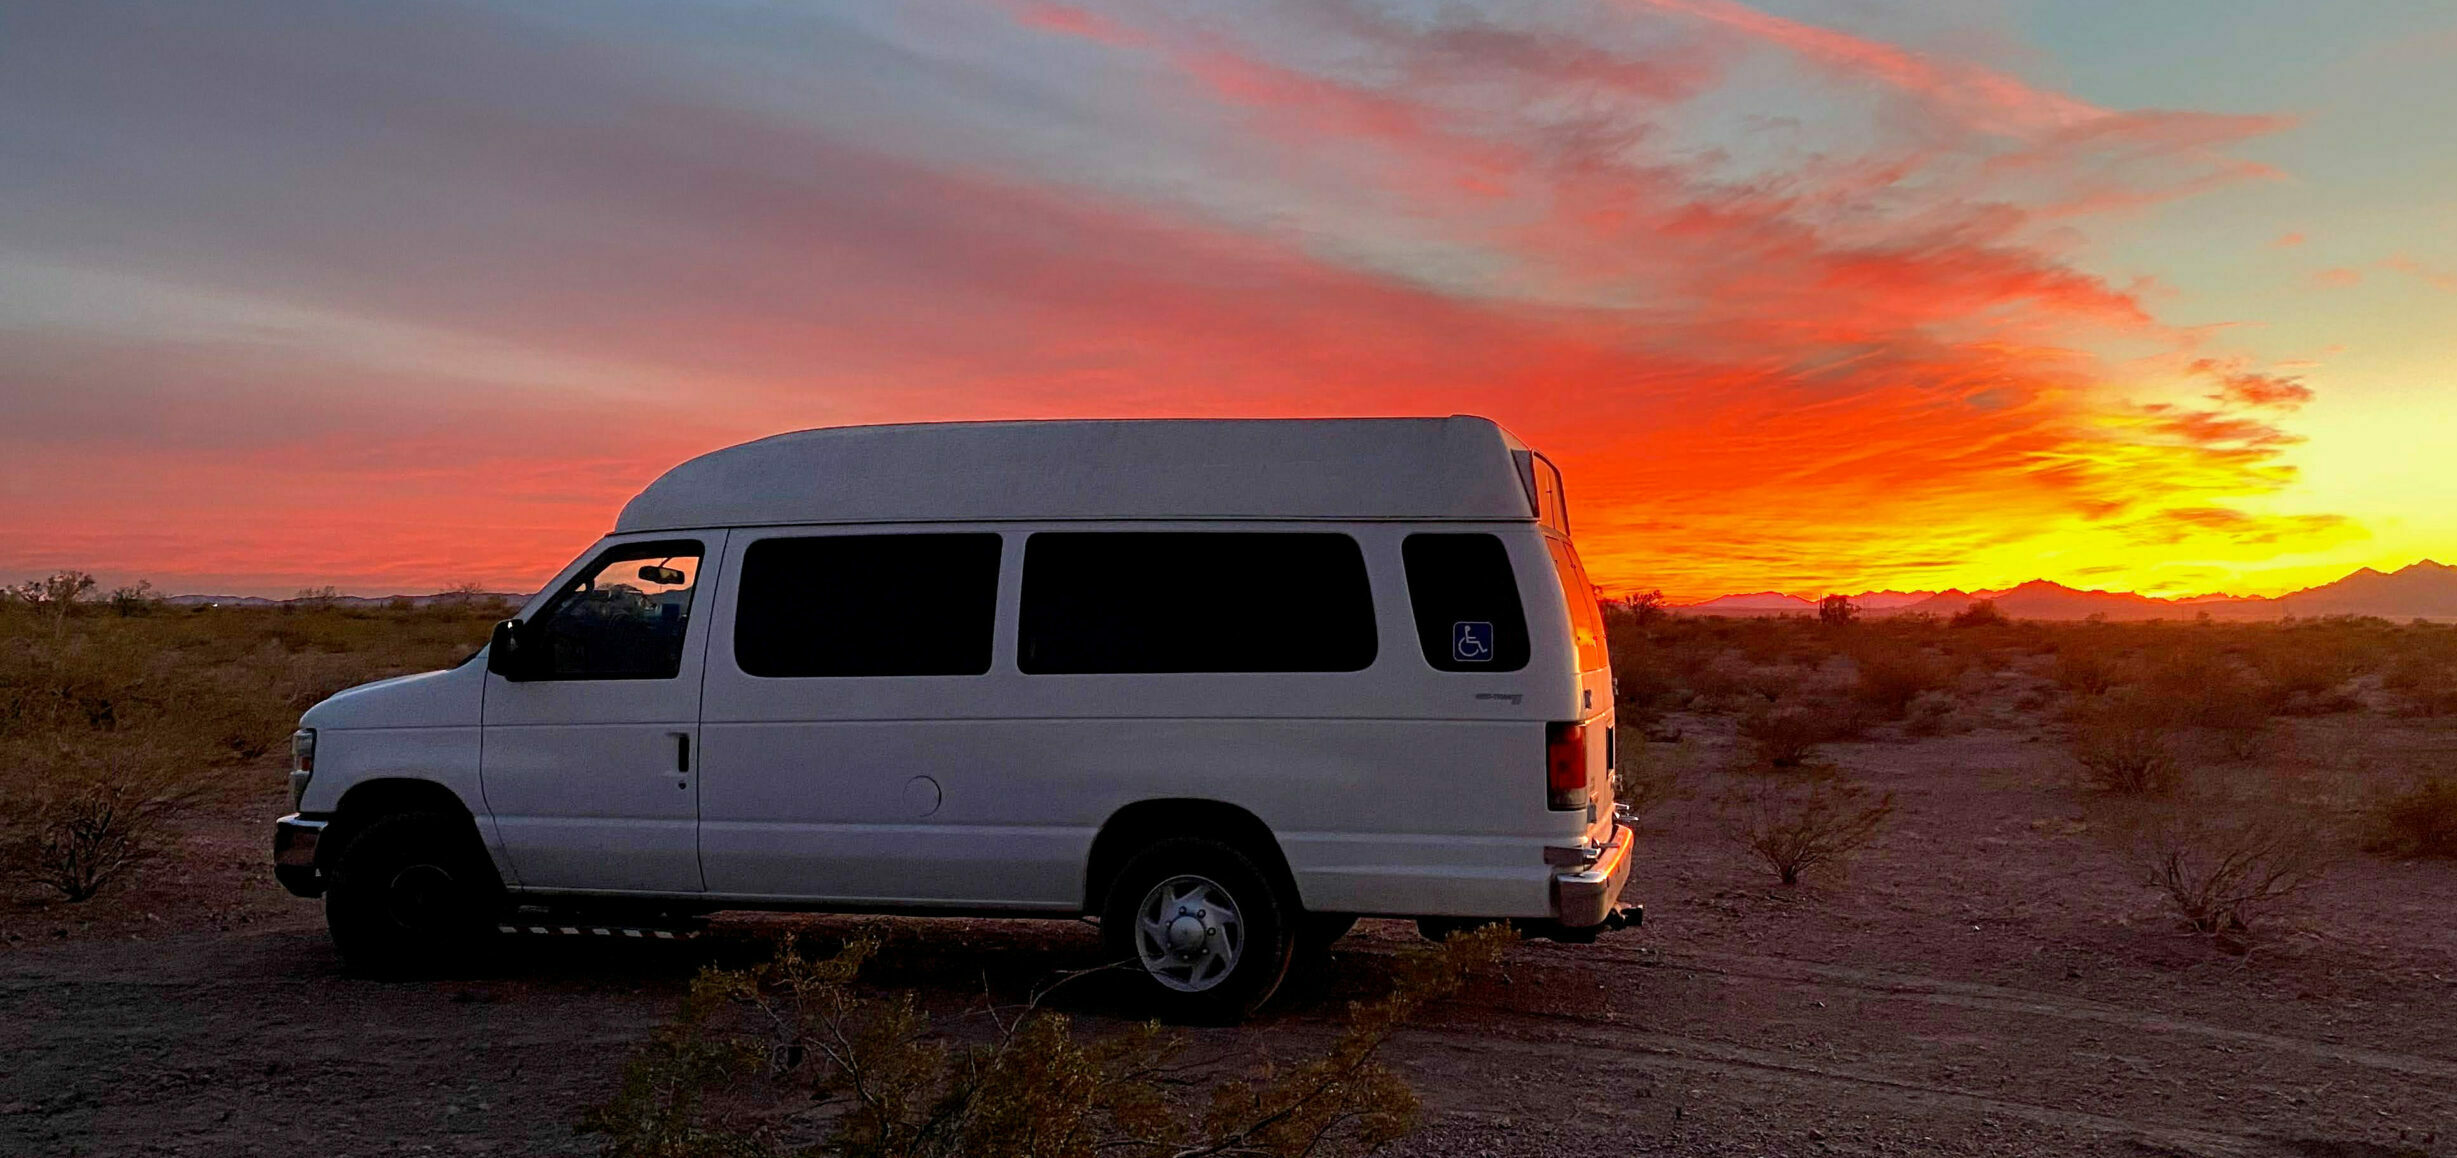 A white van parked in a dirt field with a red, gray, and yellow sky behind